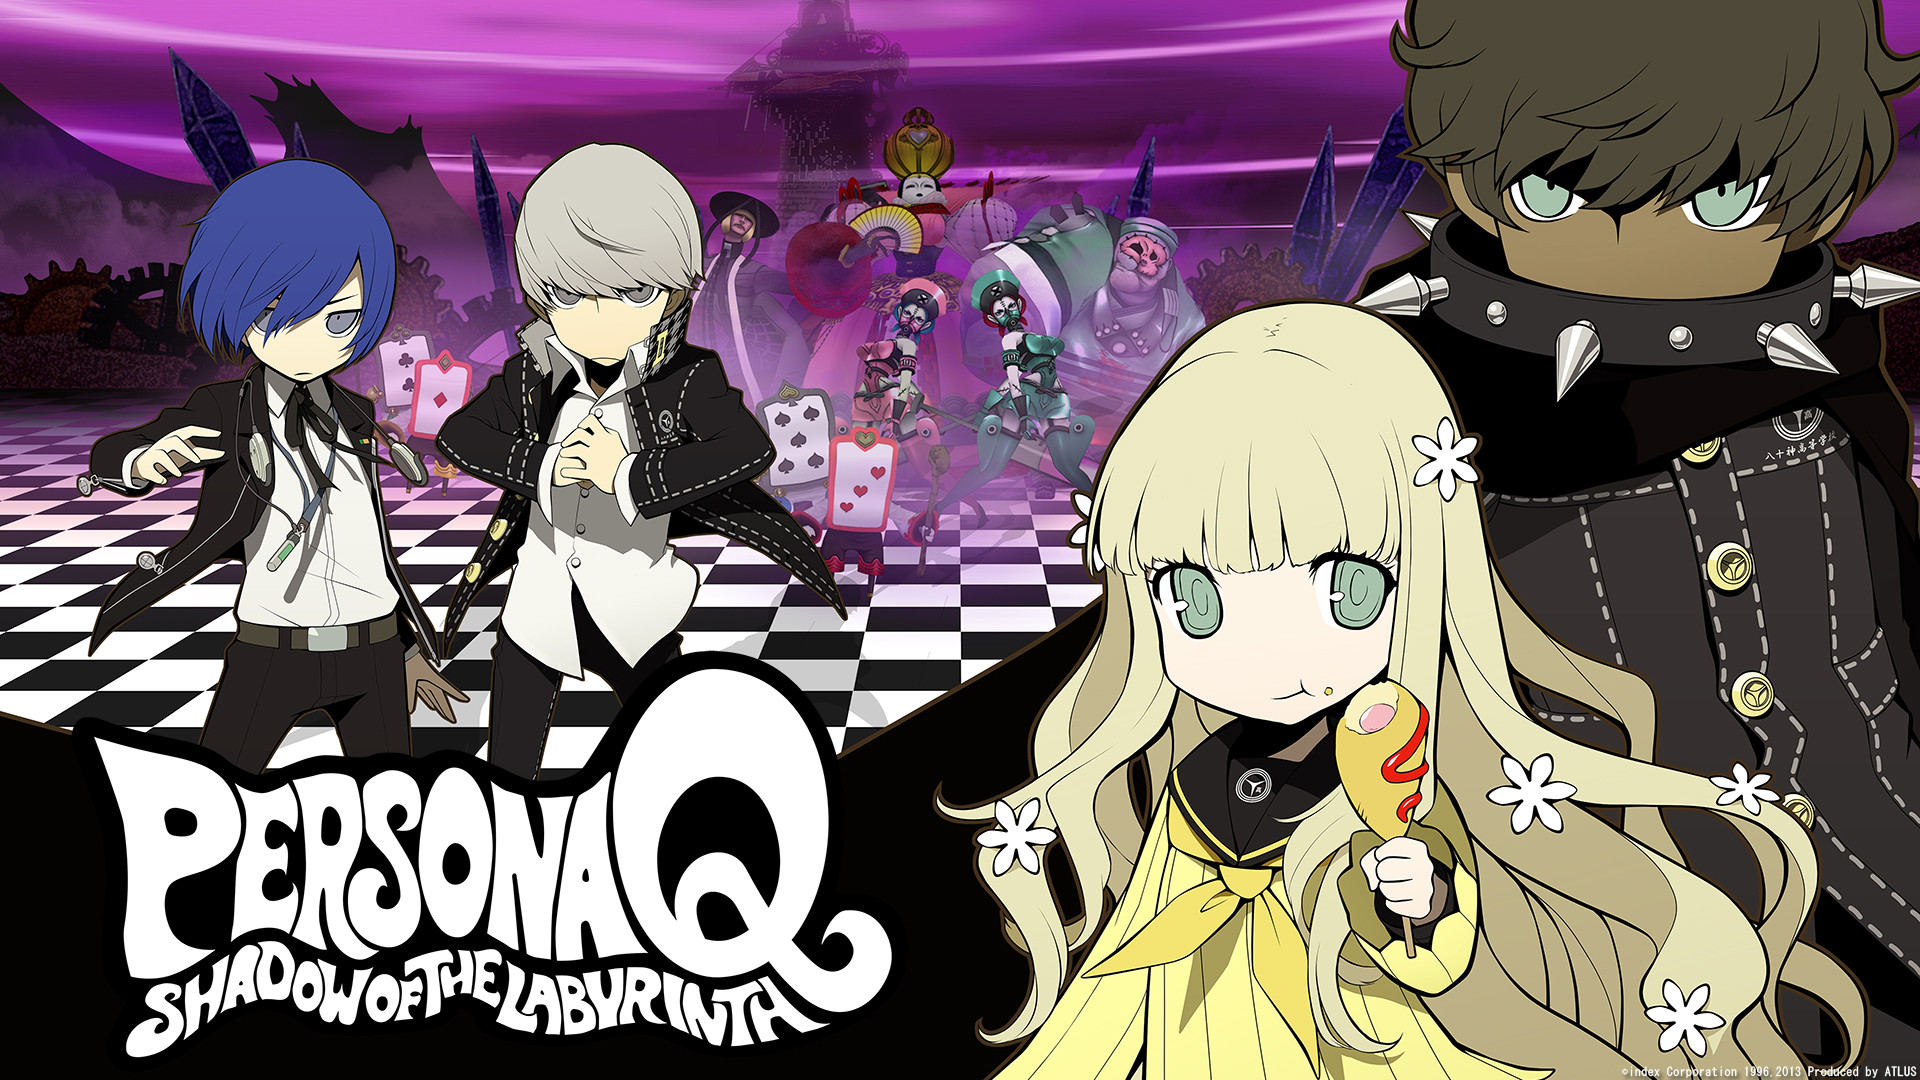 1920x1080 View Fullsize Persona Q: Shadow Of The Labyrinth Image